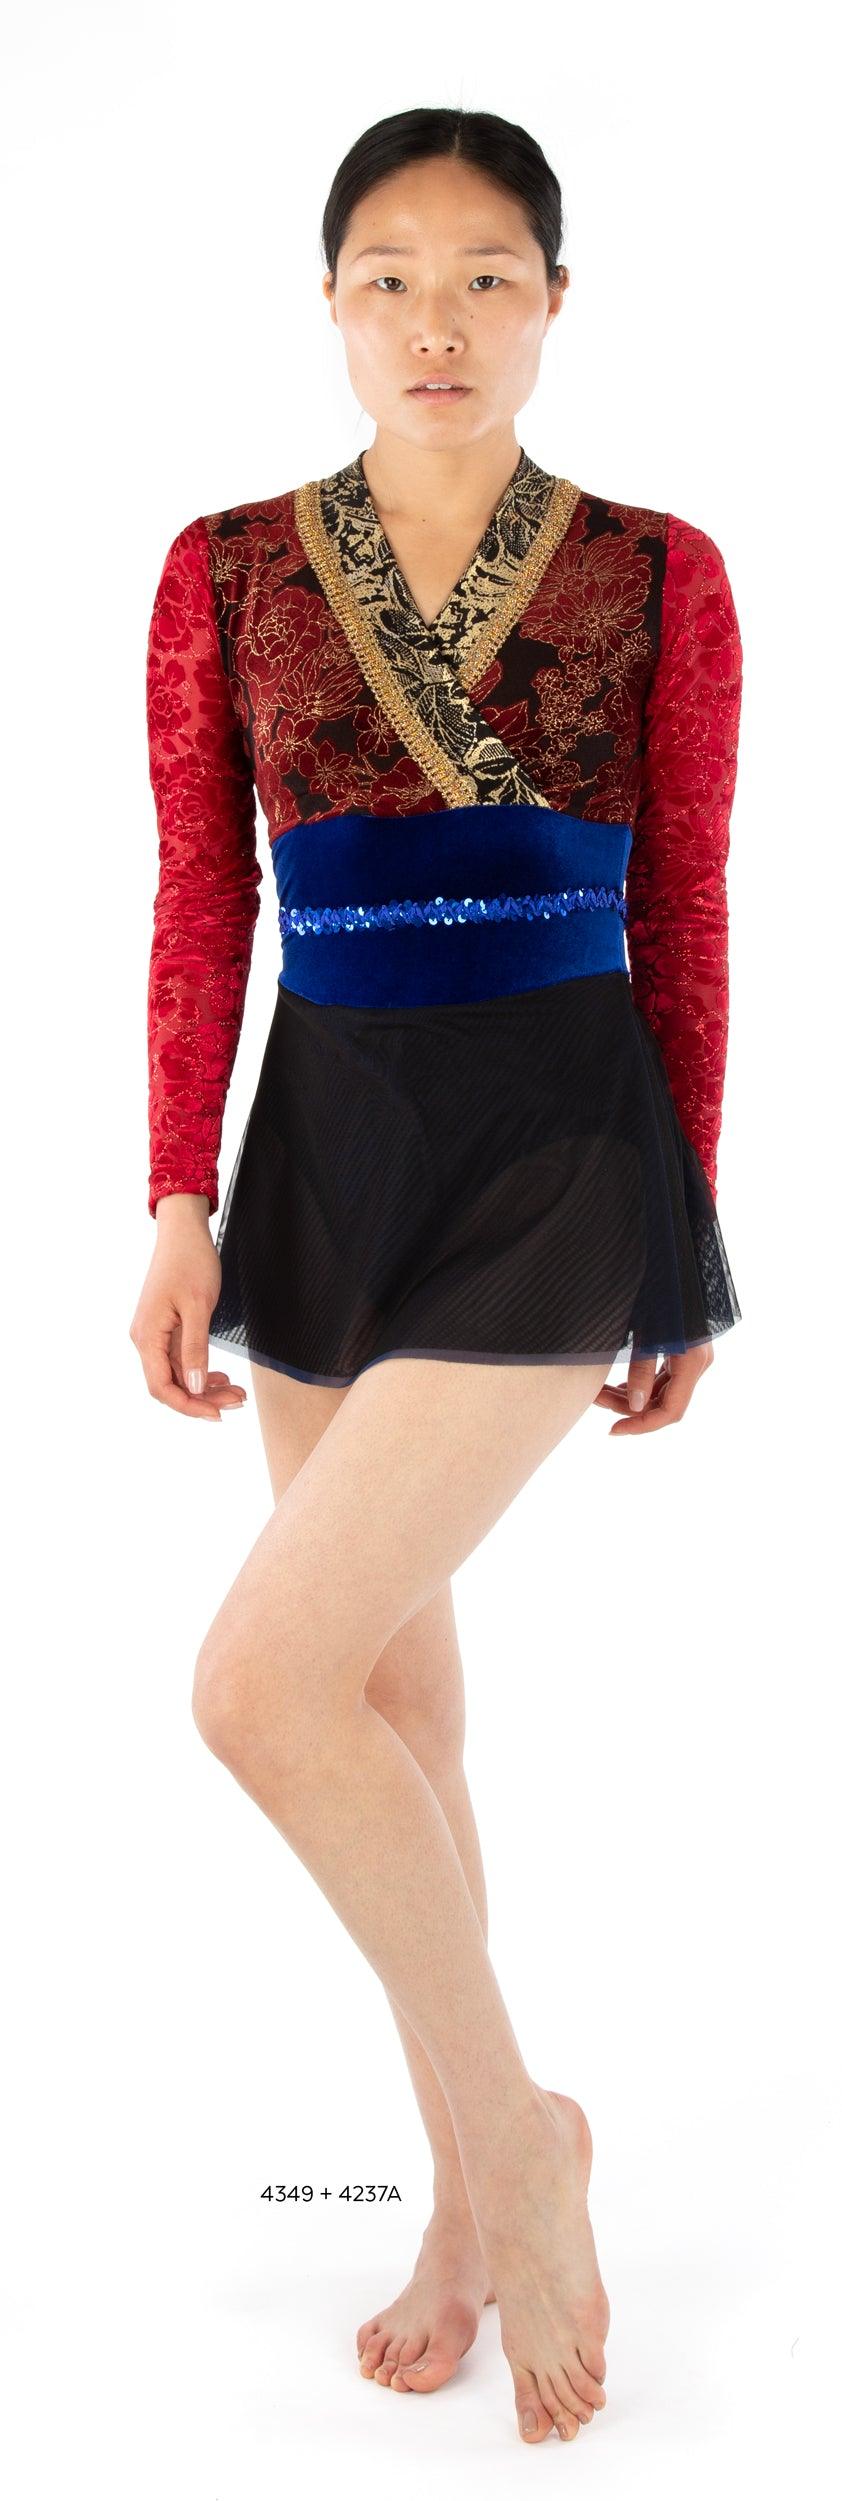 Emma leotard with 4237A skirt add-on (sold separately)